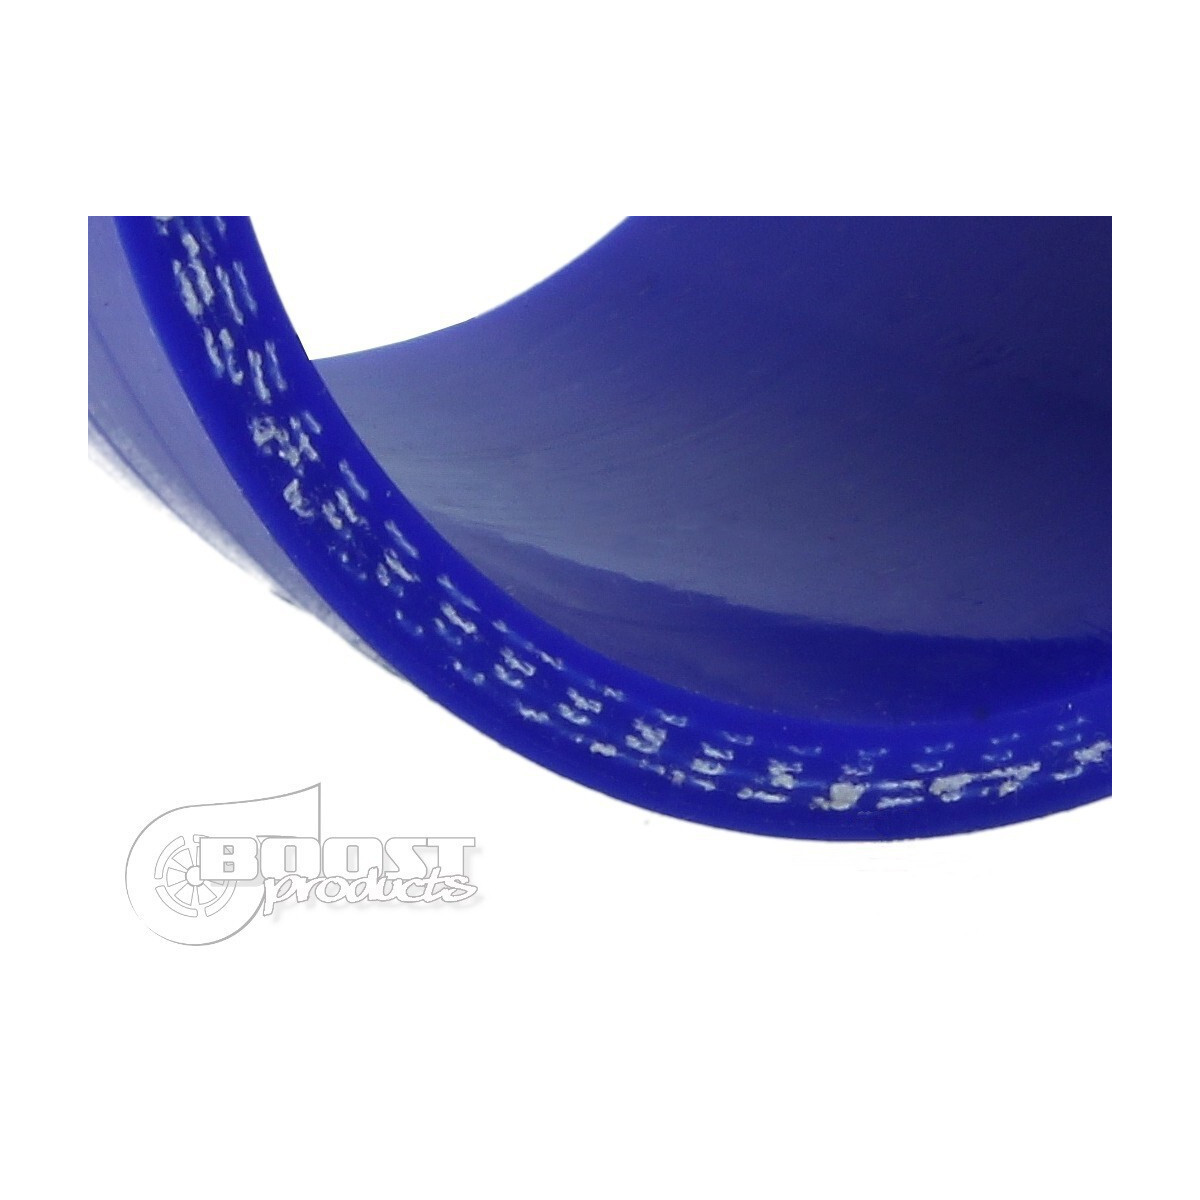 BOOST products Silicone Transition elbow 90°, 76 - 60mm, blue